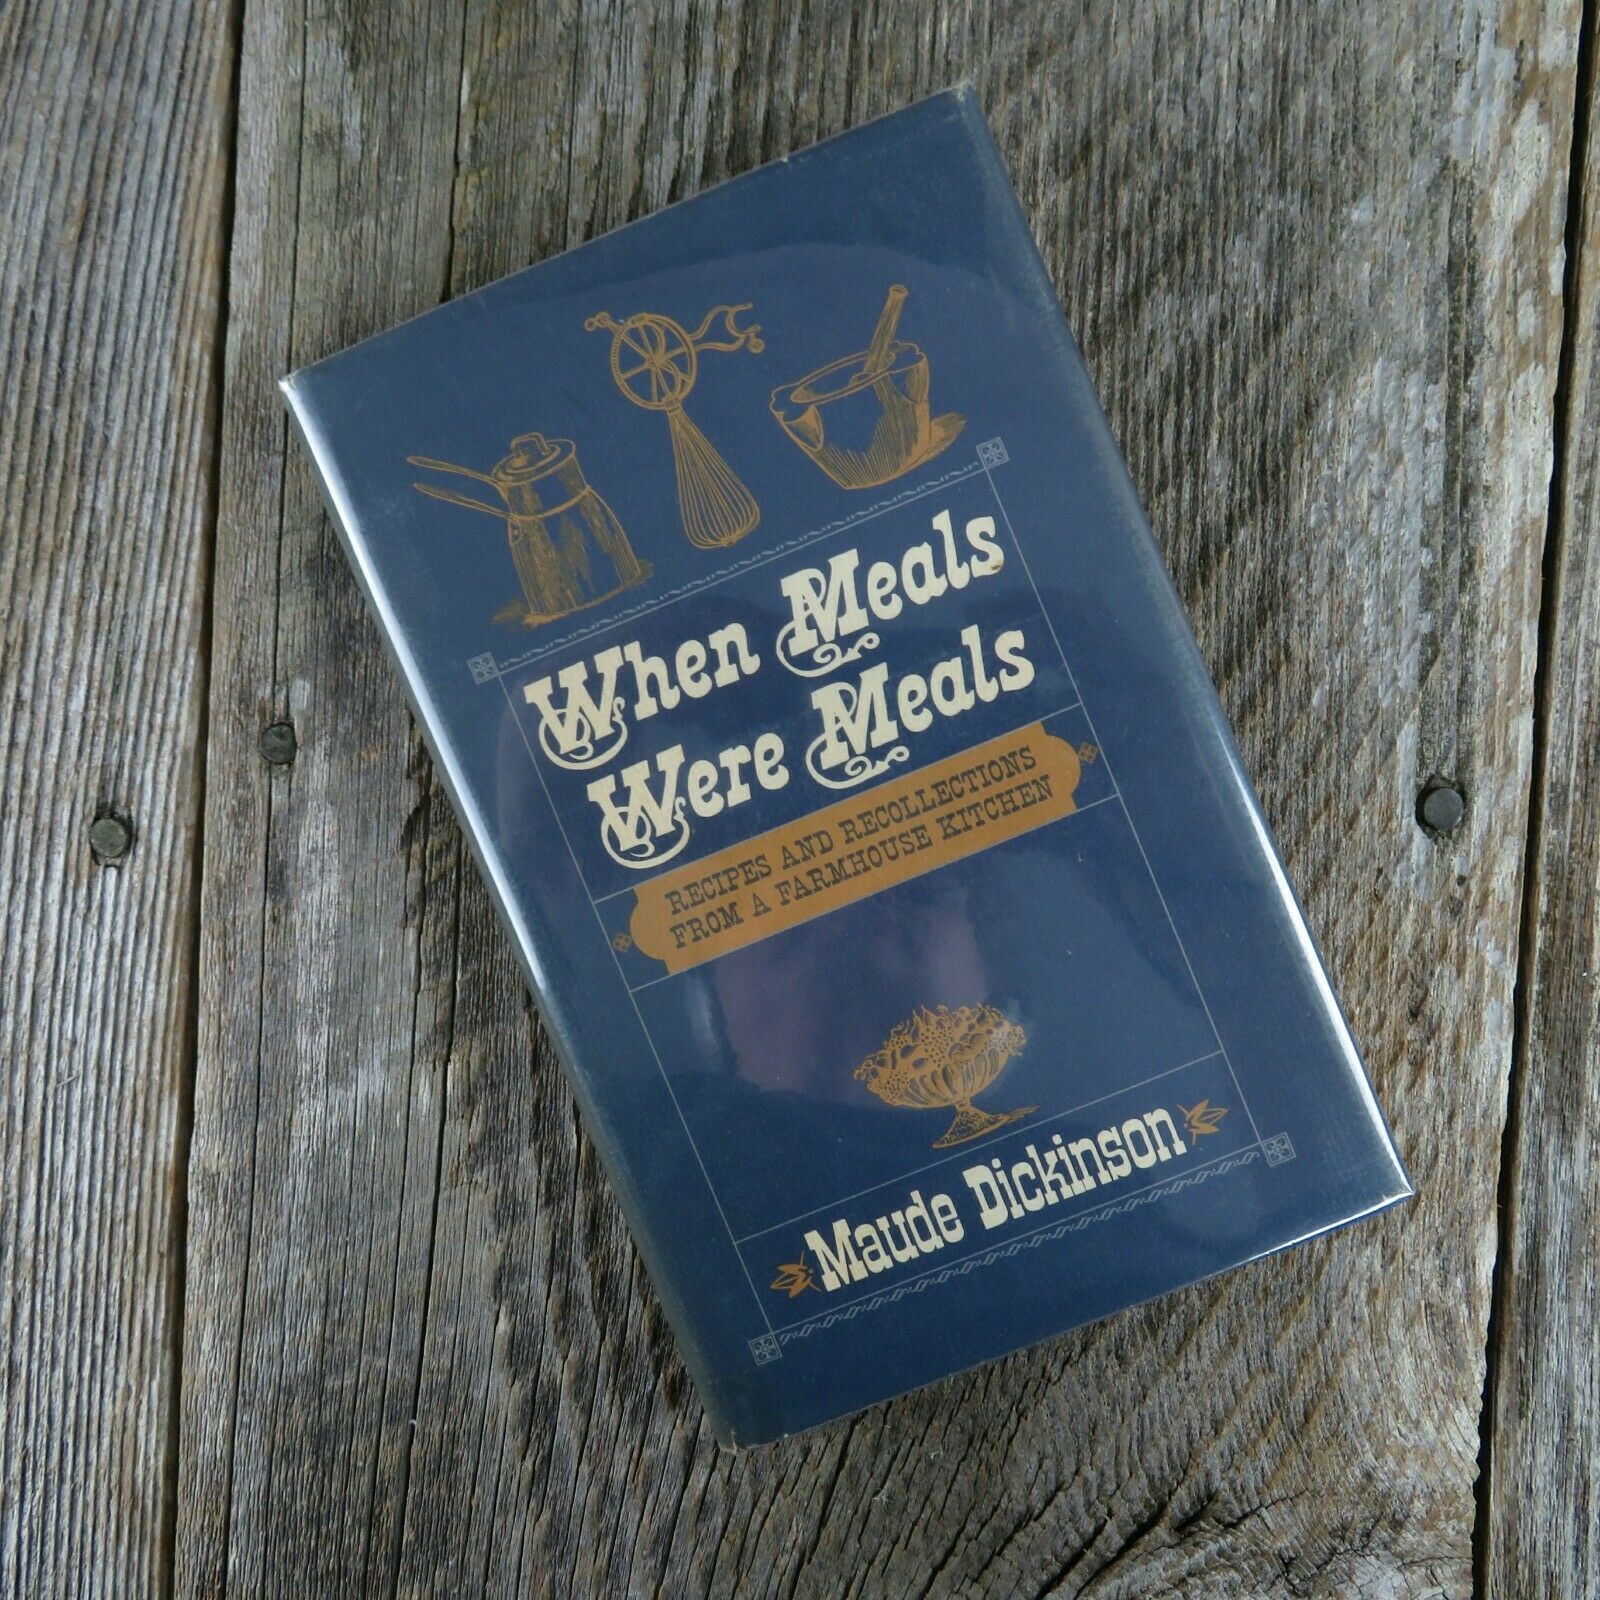 Vintage Cookbook When Meals Were Meals Maude Dickinson 1967 First Printing - At Grandma's Table